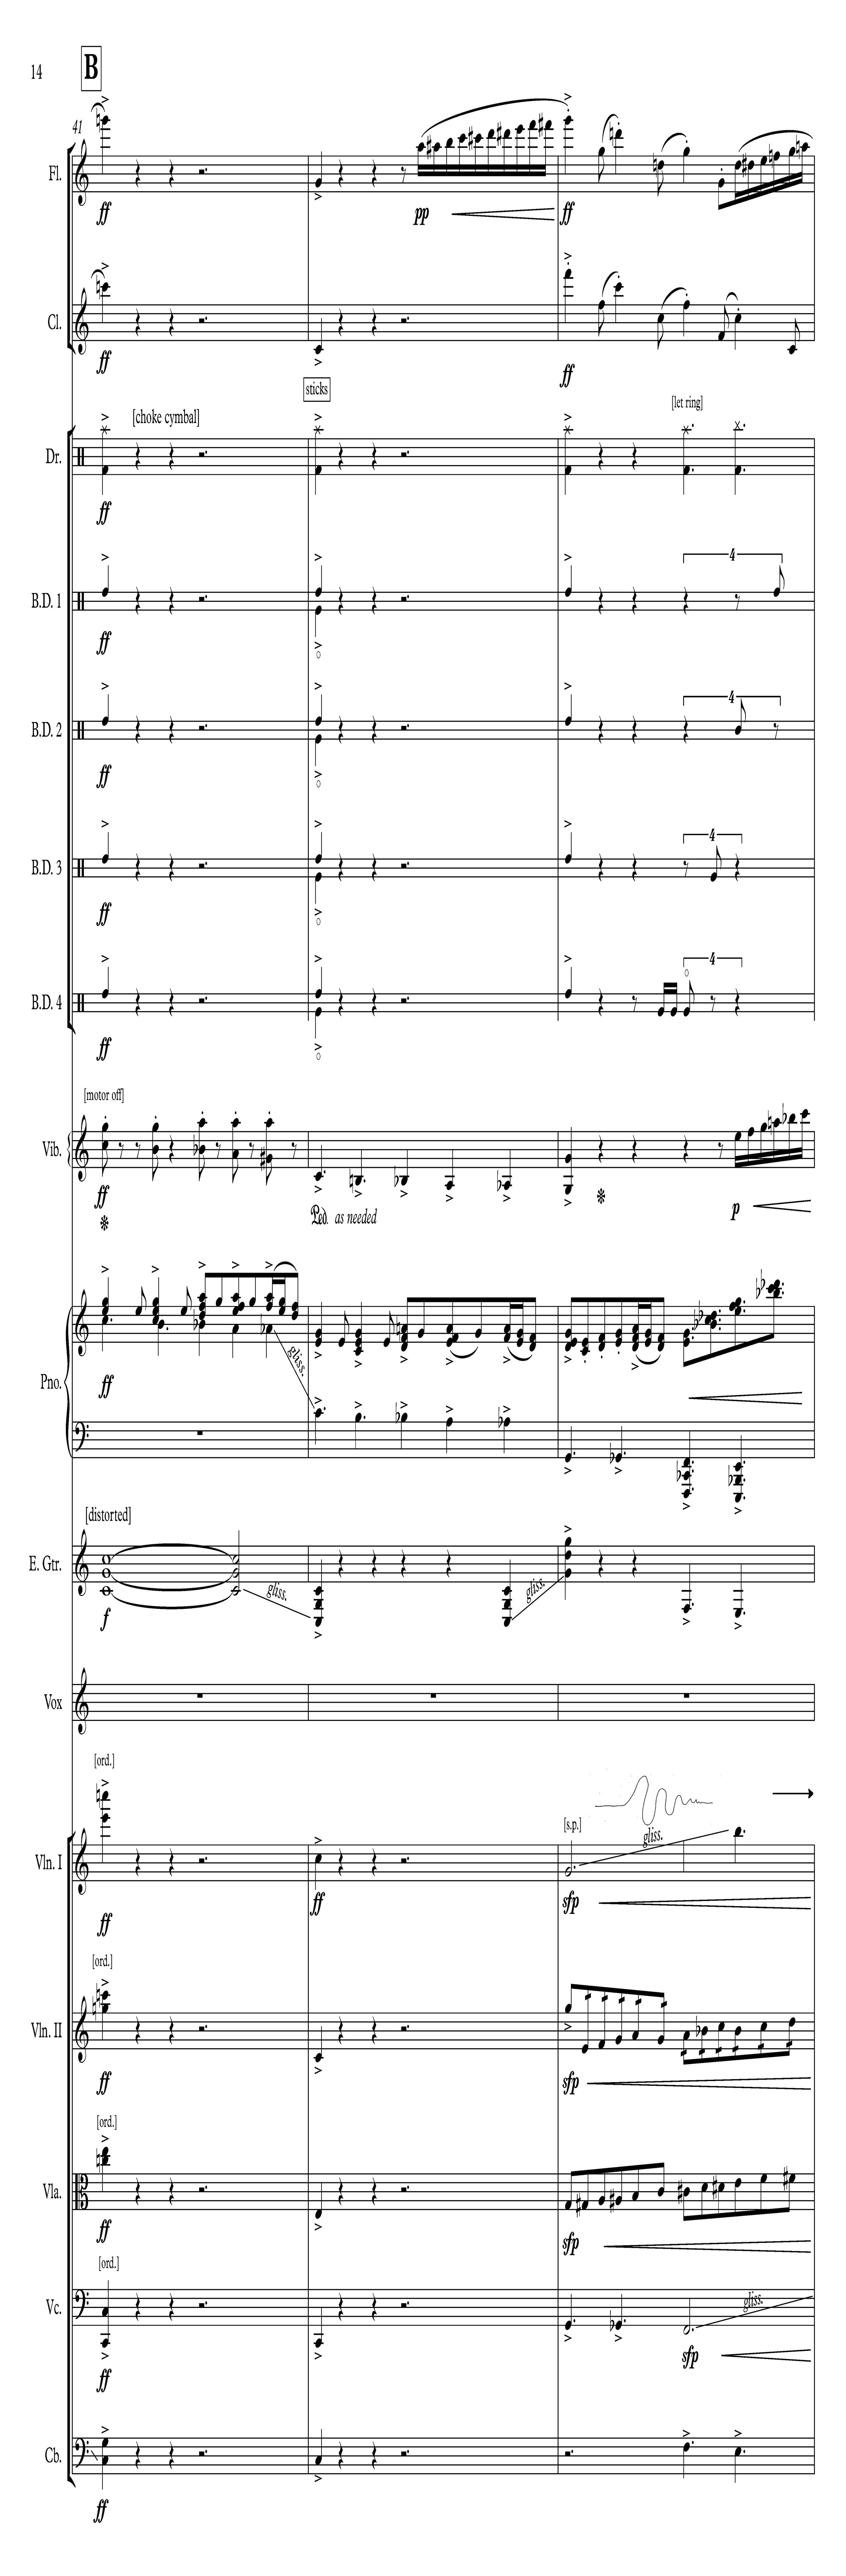 The Rembrandt of Avenue A - Complete Score_Page_20.jpg